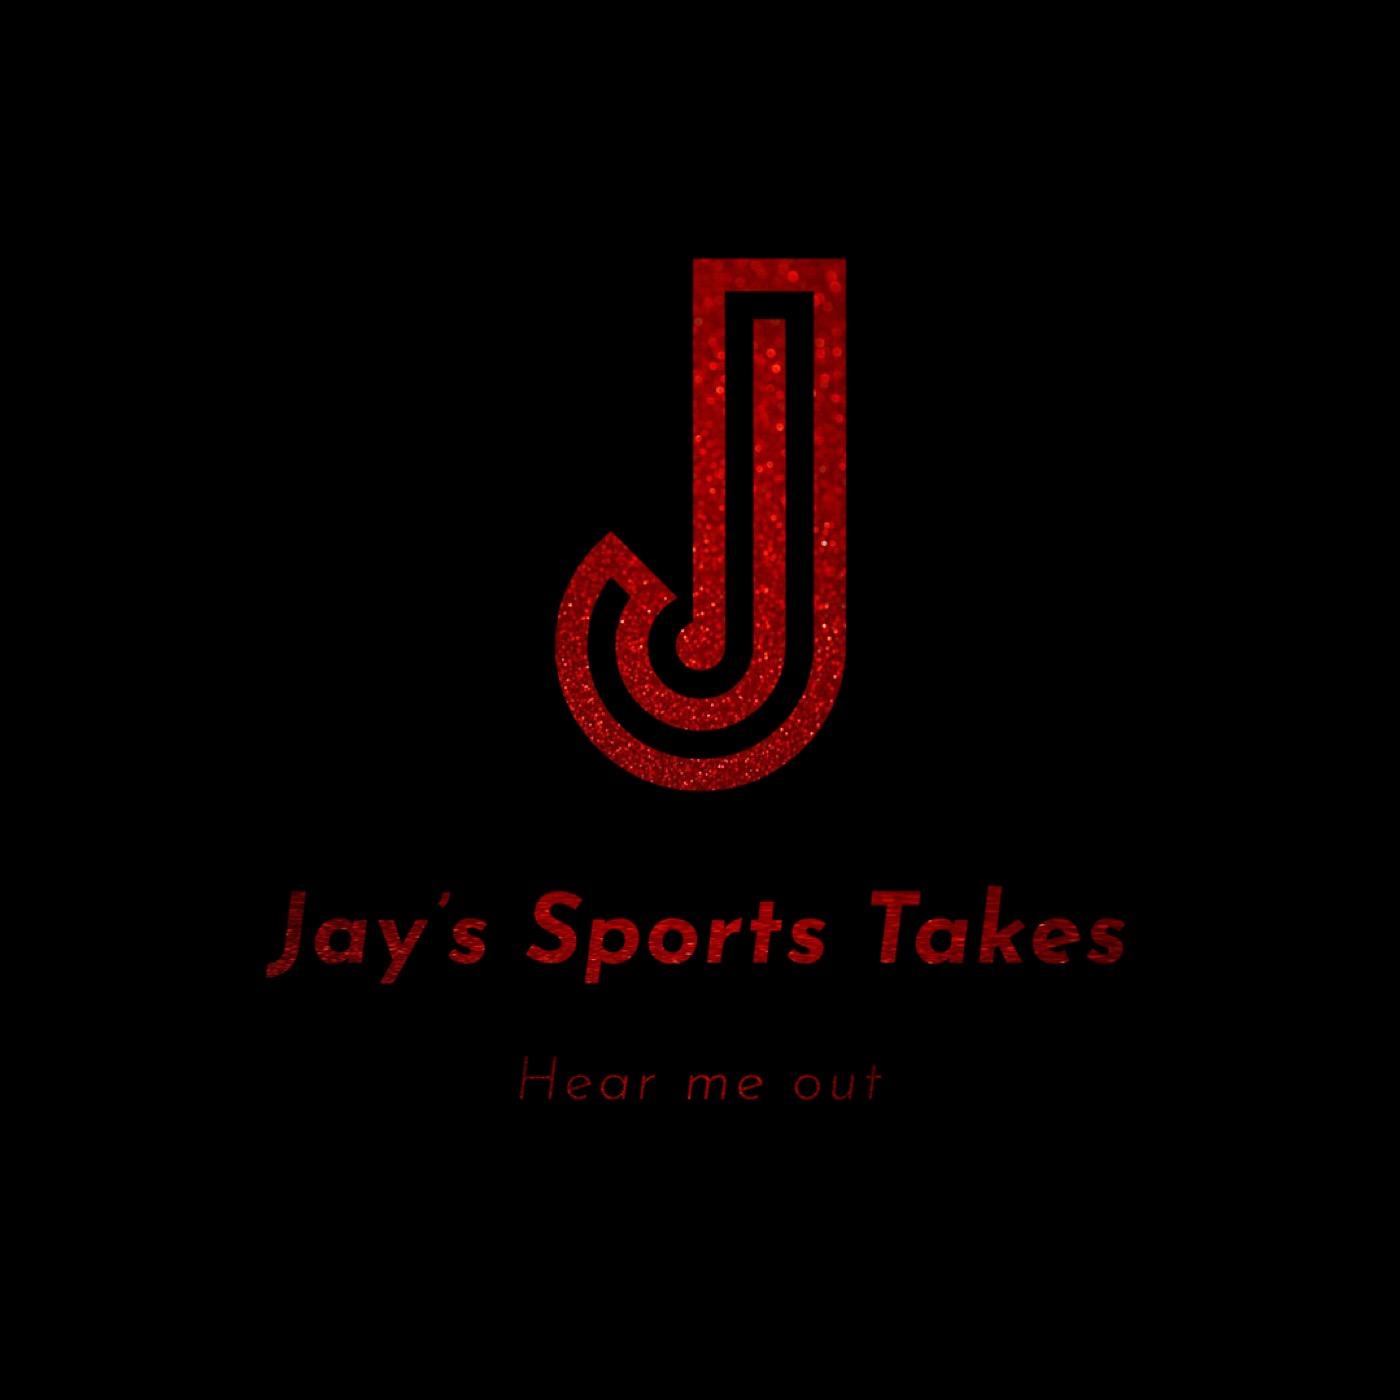 Jay's Sports takes